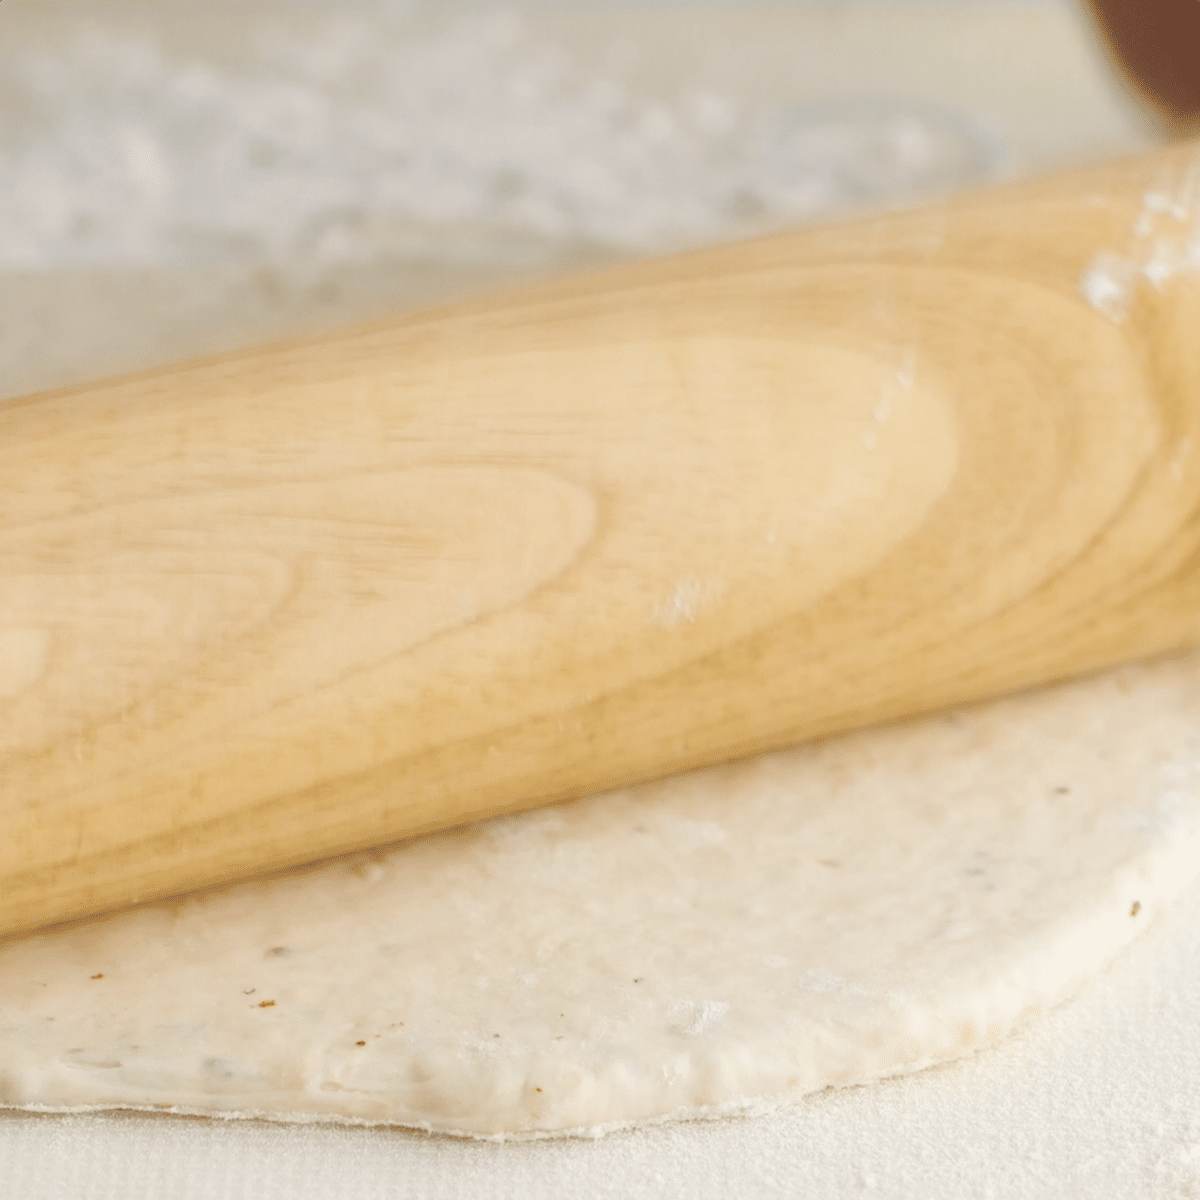 Rolling pin rolling out the cracker dough